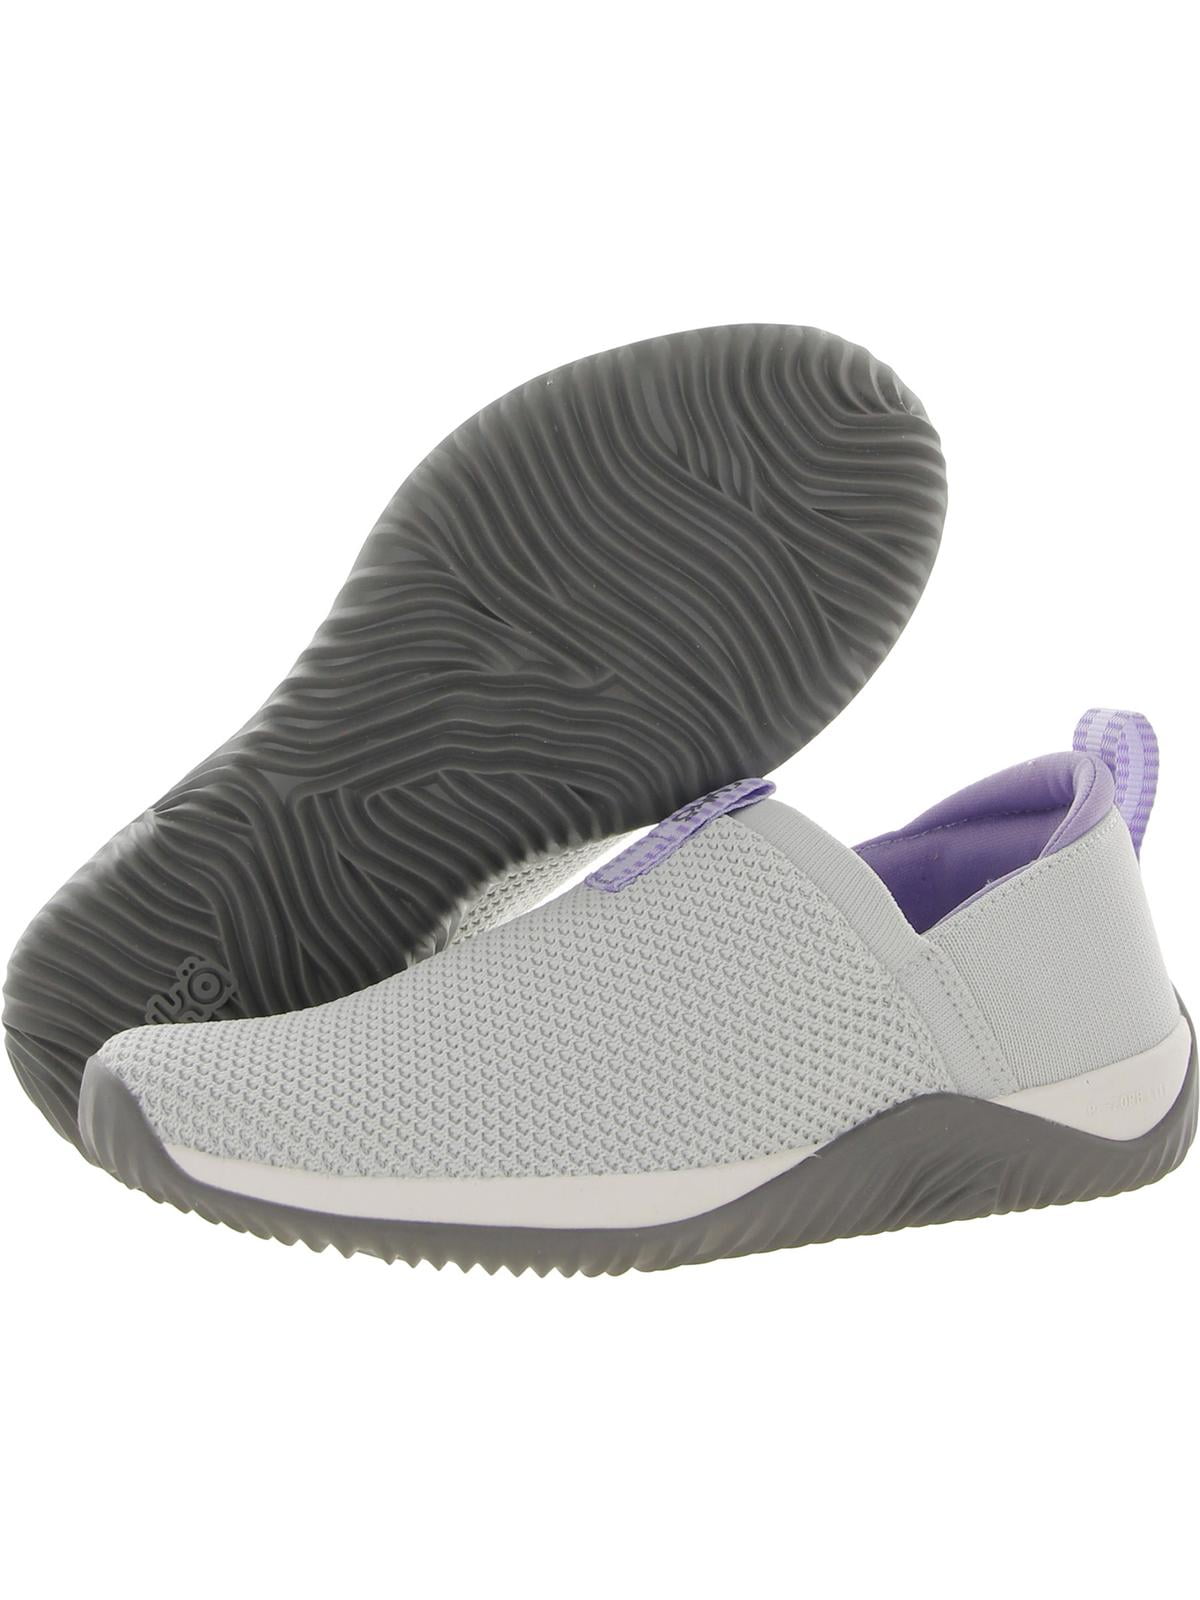 Ryka Womens Echo Ease Fitness Lifestyle Slip-On Sneakers